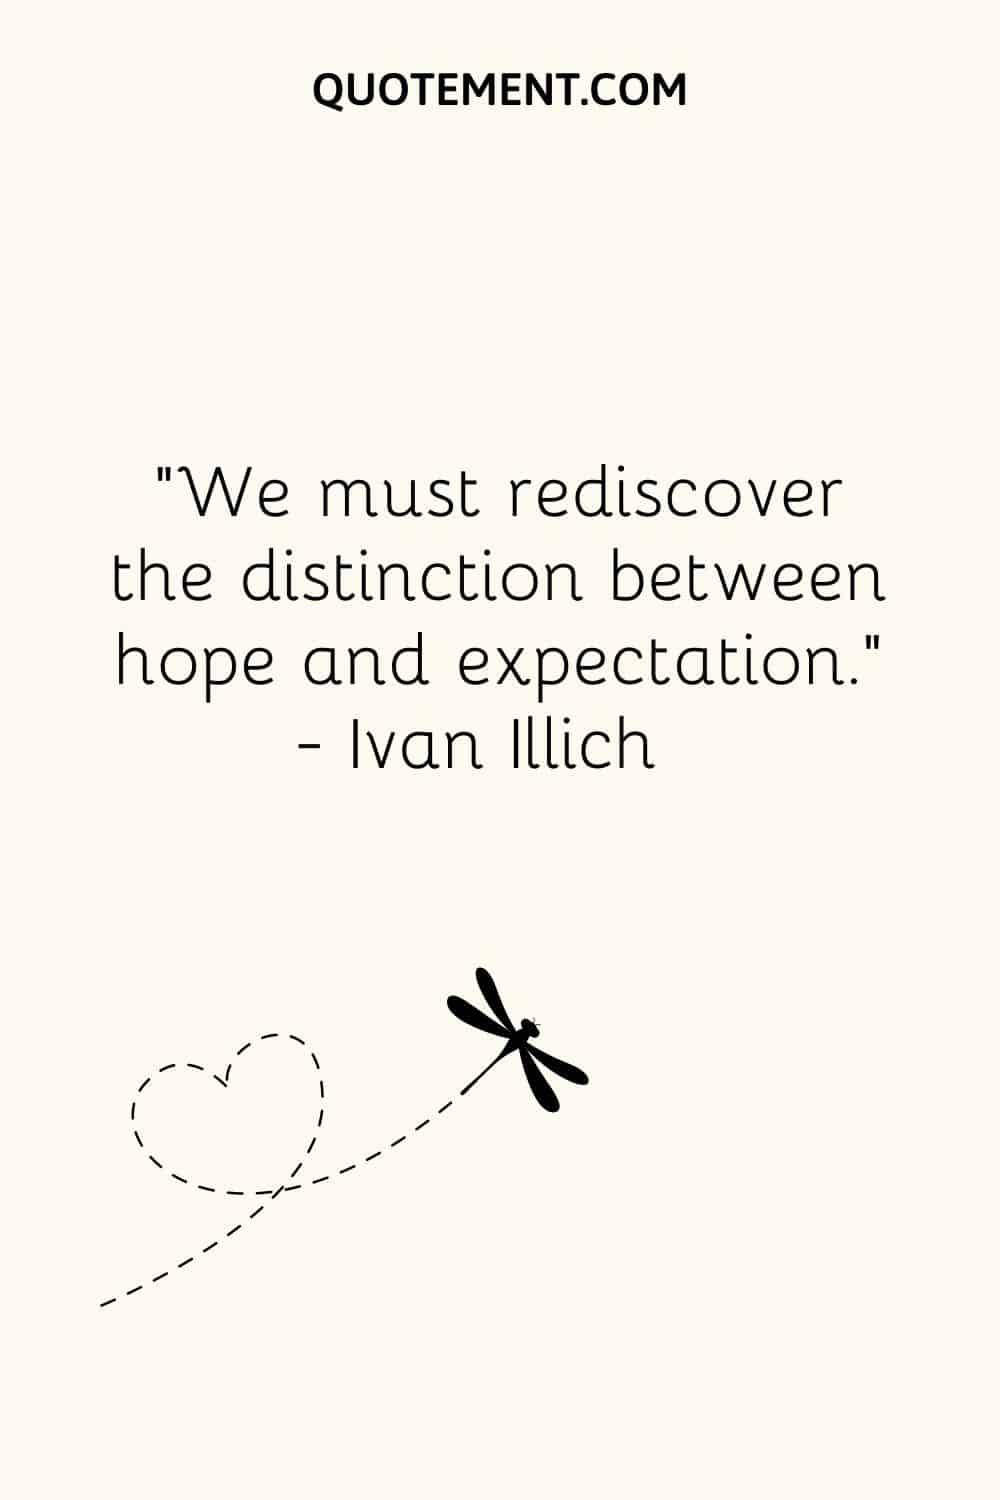 We must rediscover the distinction between hope and expectation